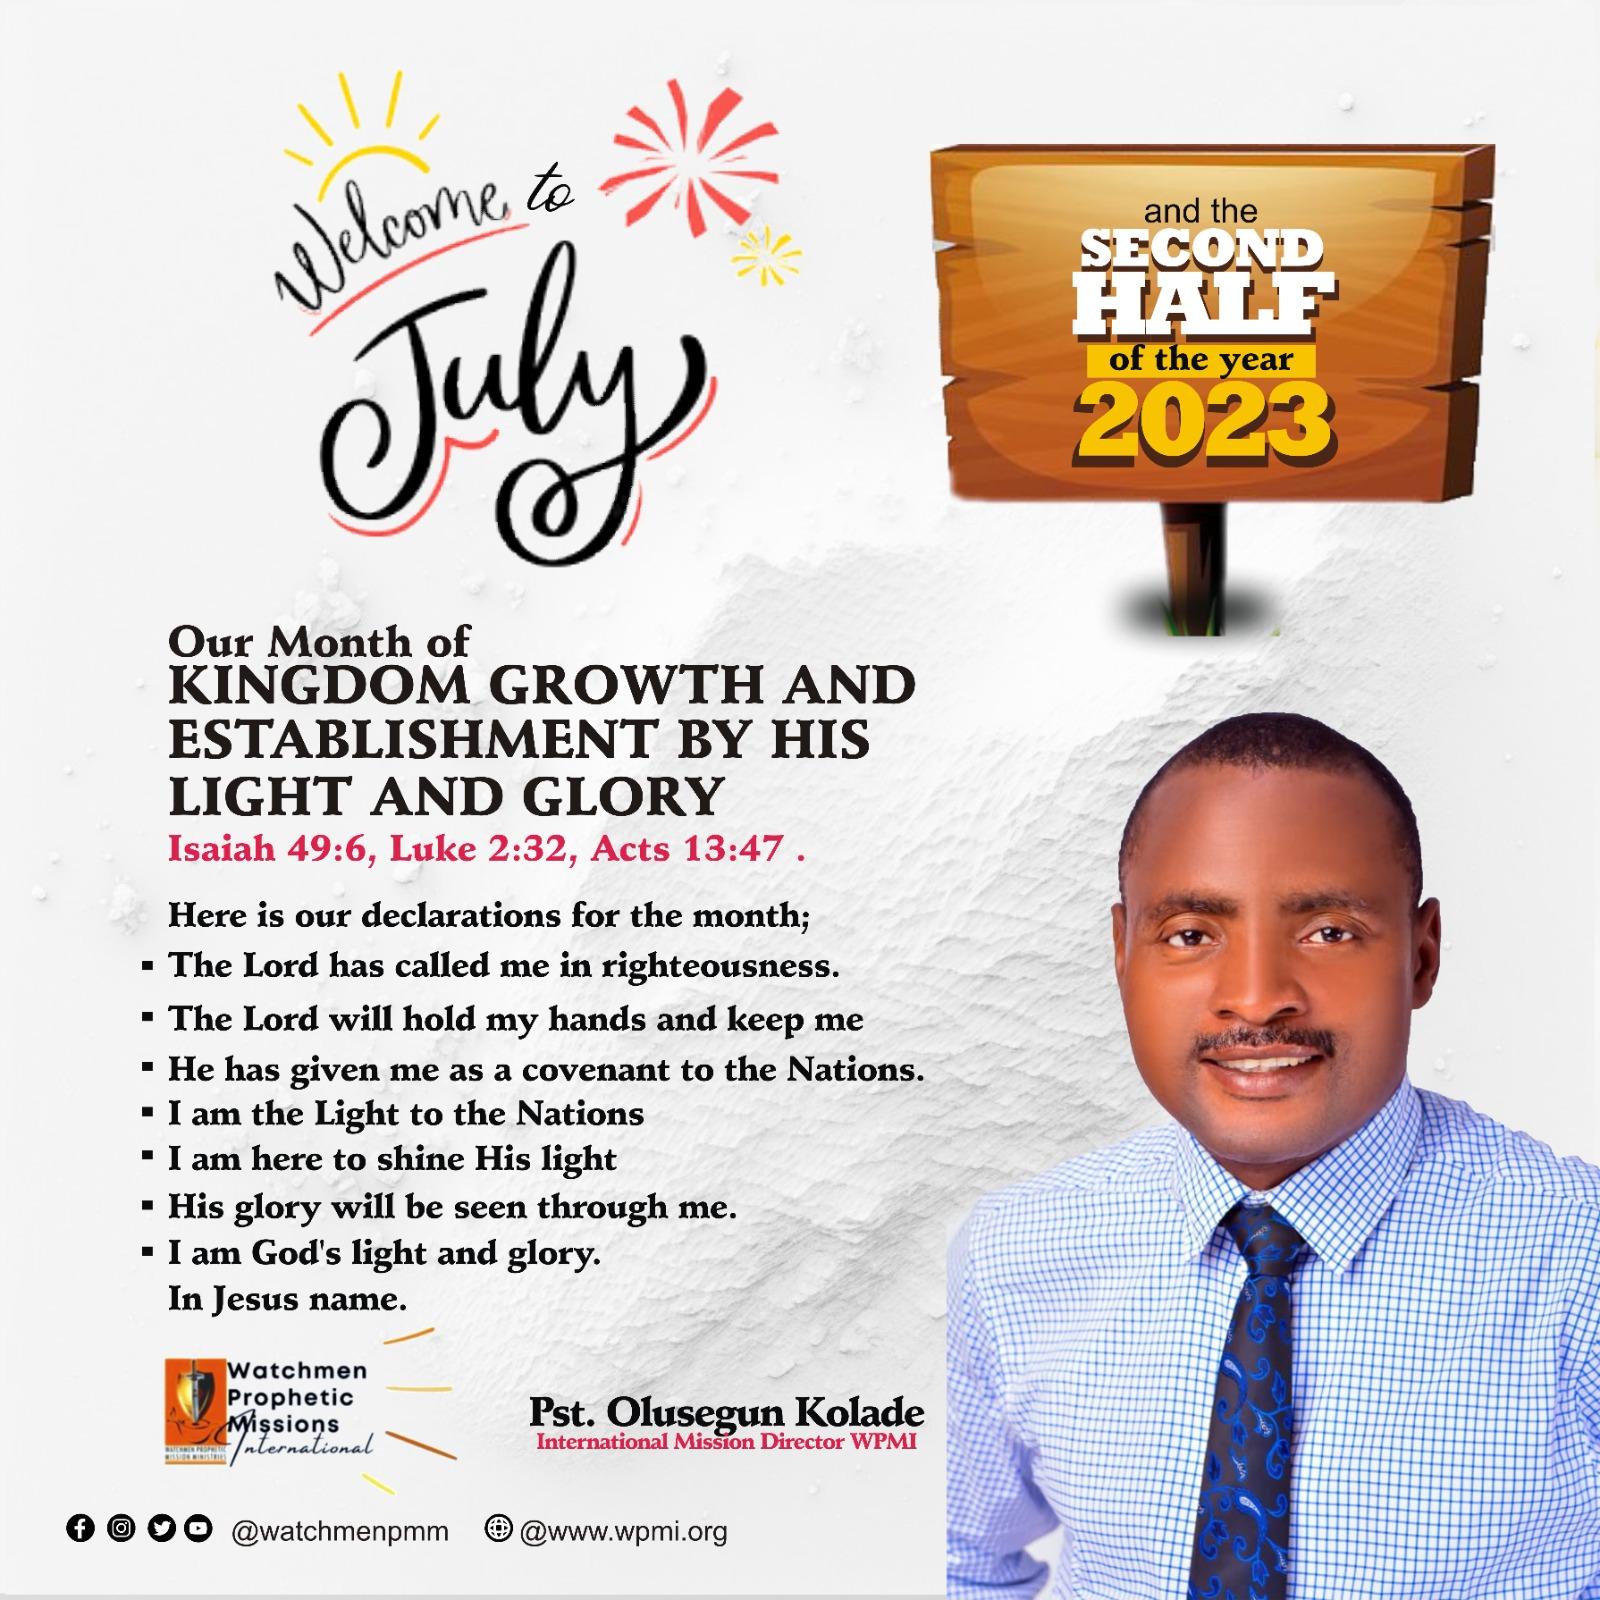 Hello July, Our Month of Kingdom Growth and Establishment by His Light and Glory (Isaiah 49:6)